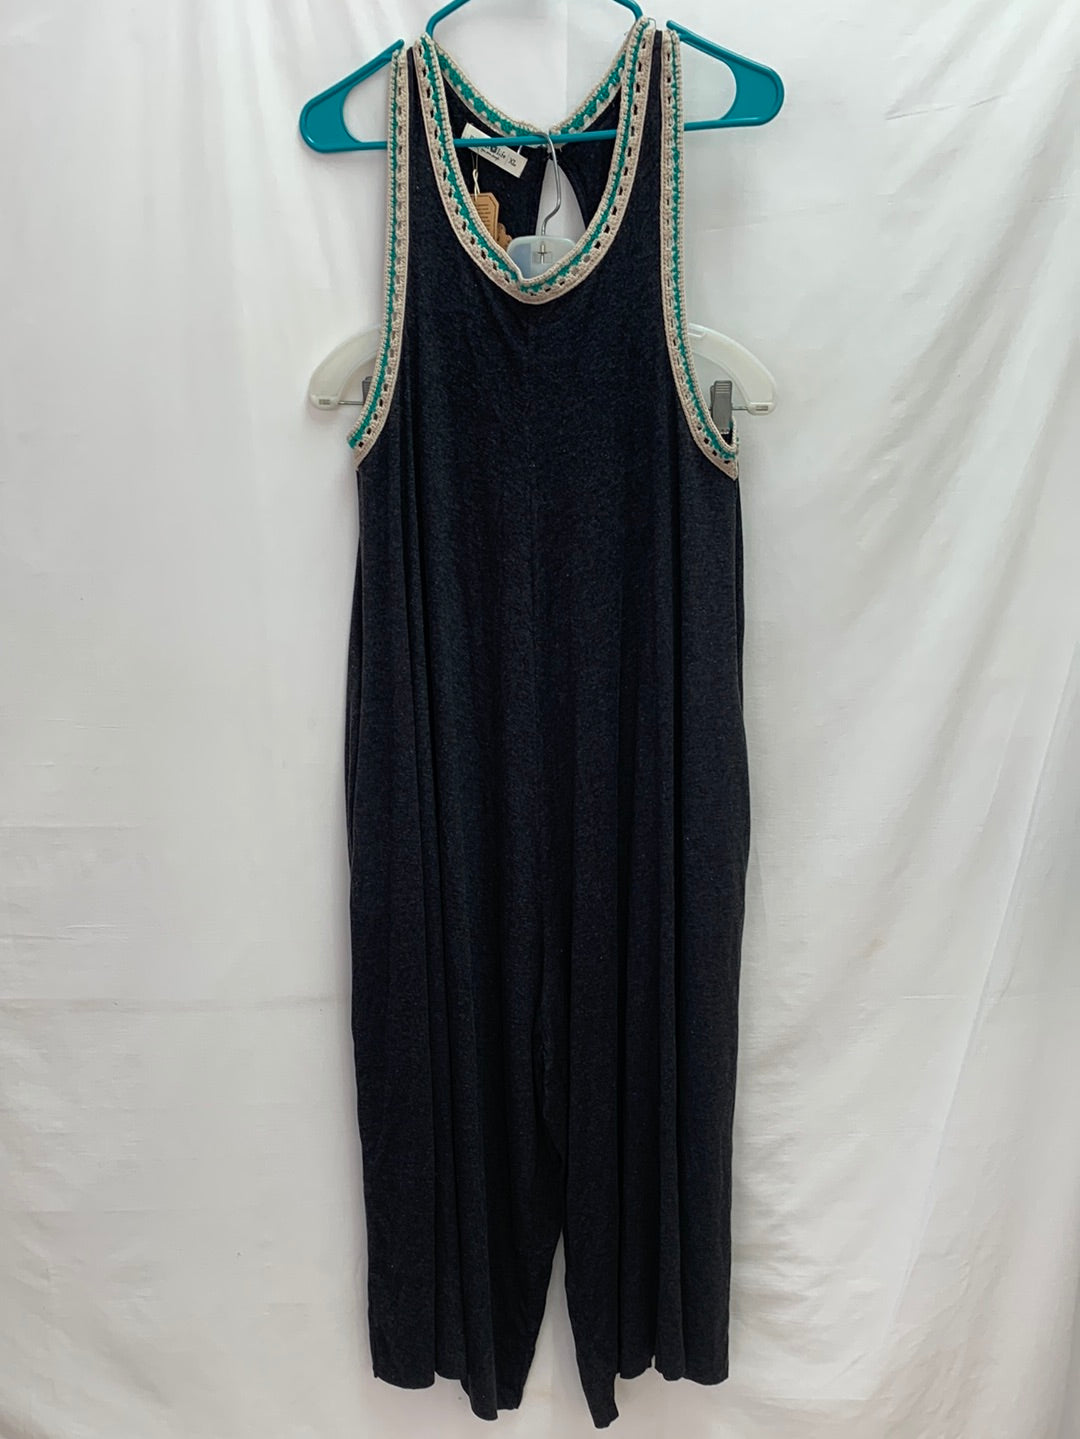 NWT - NATURAL LIFE charcoal gray Crochet Detail Willow Jumpsuit - XL